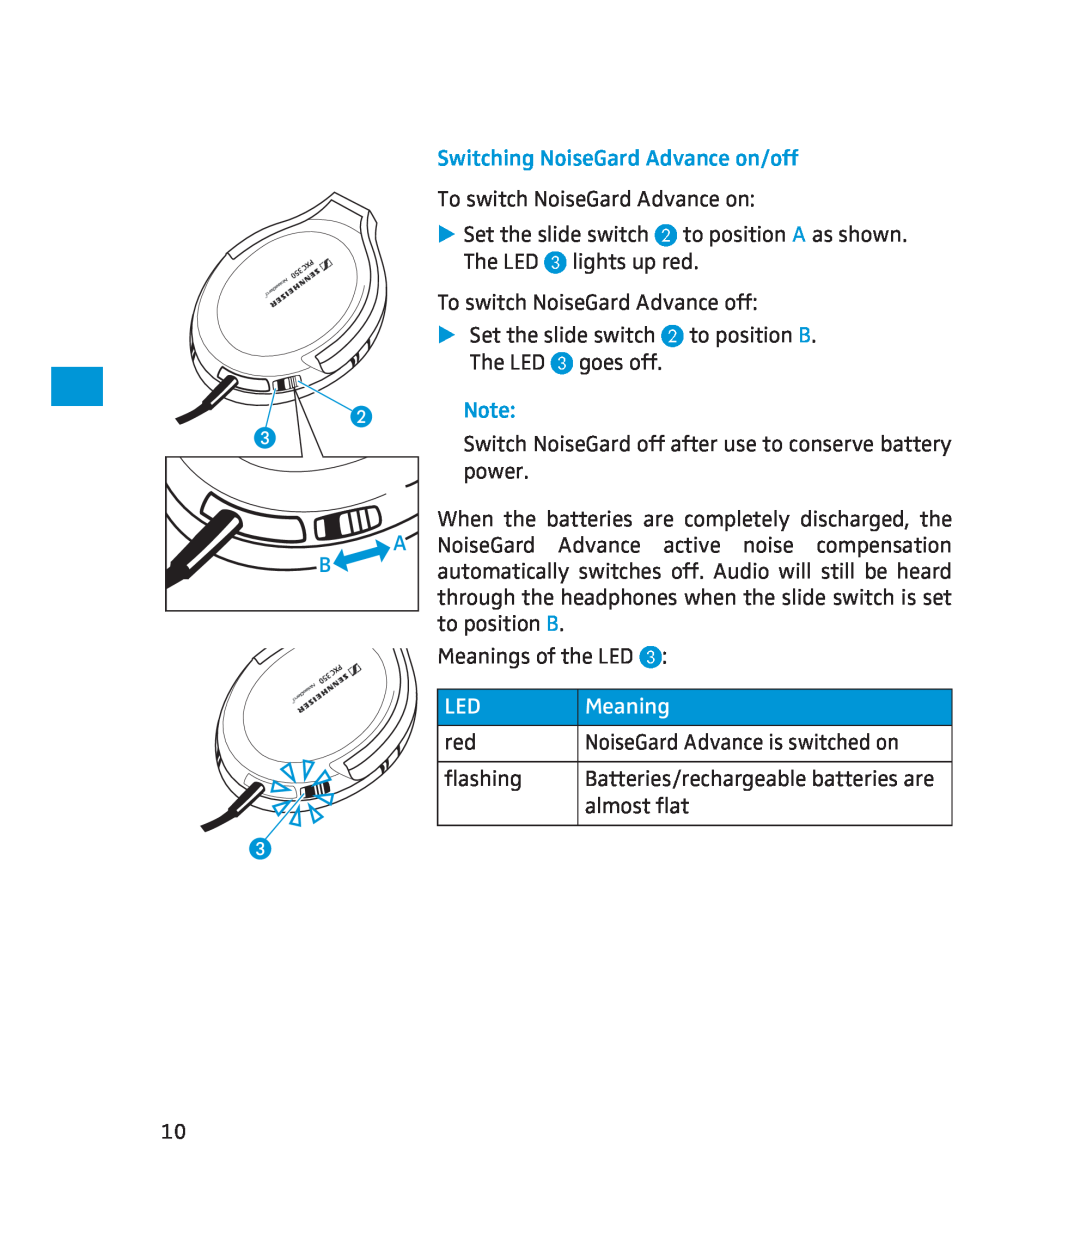 Sennheiser PXC 350 instruction manual Switching NoiseGard Advance on/off, To switch NoiseGard Advance on, Meaning 